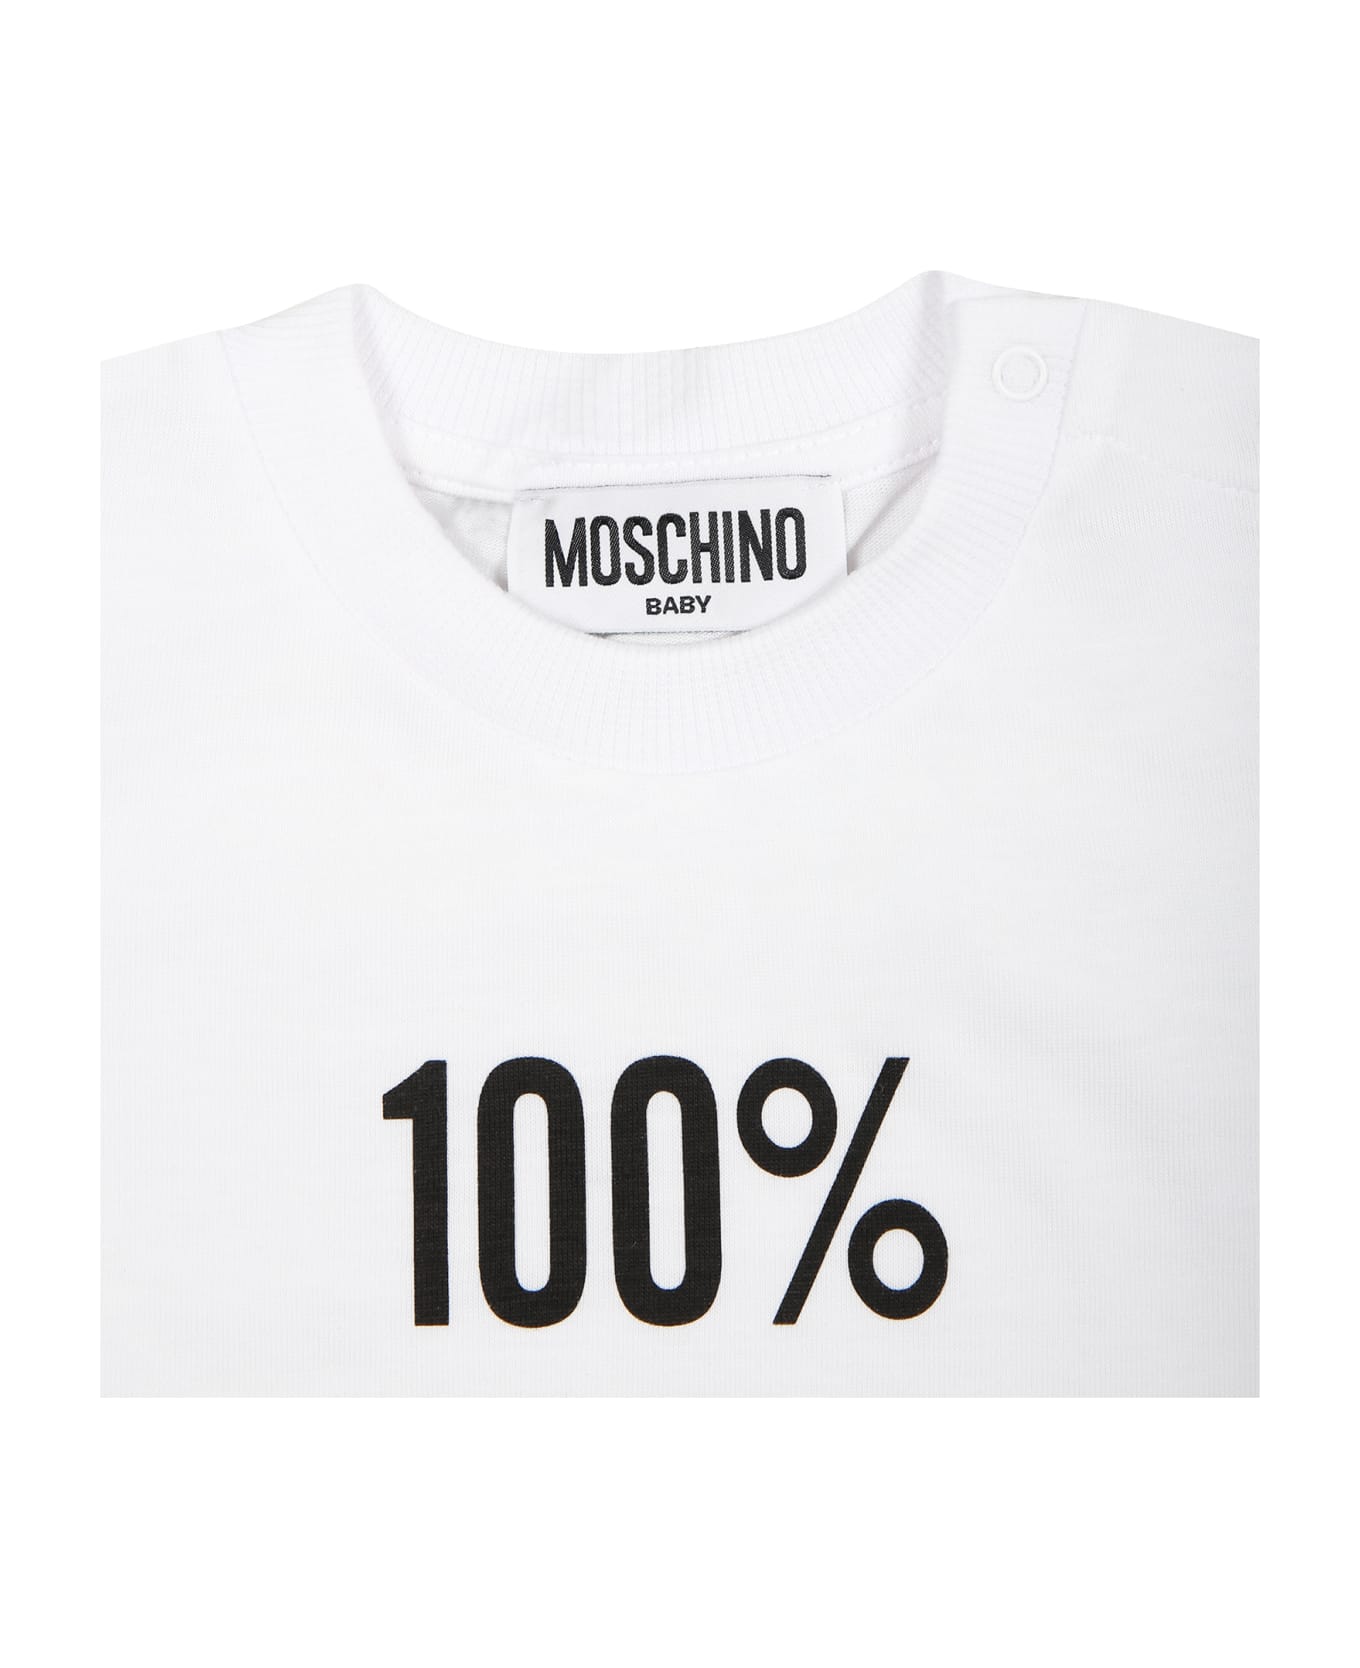 Moschino White T-shirt For Babies With Print - White